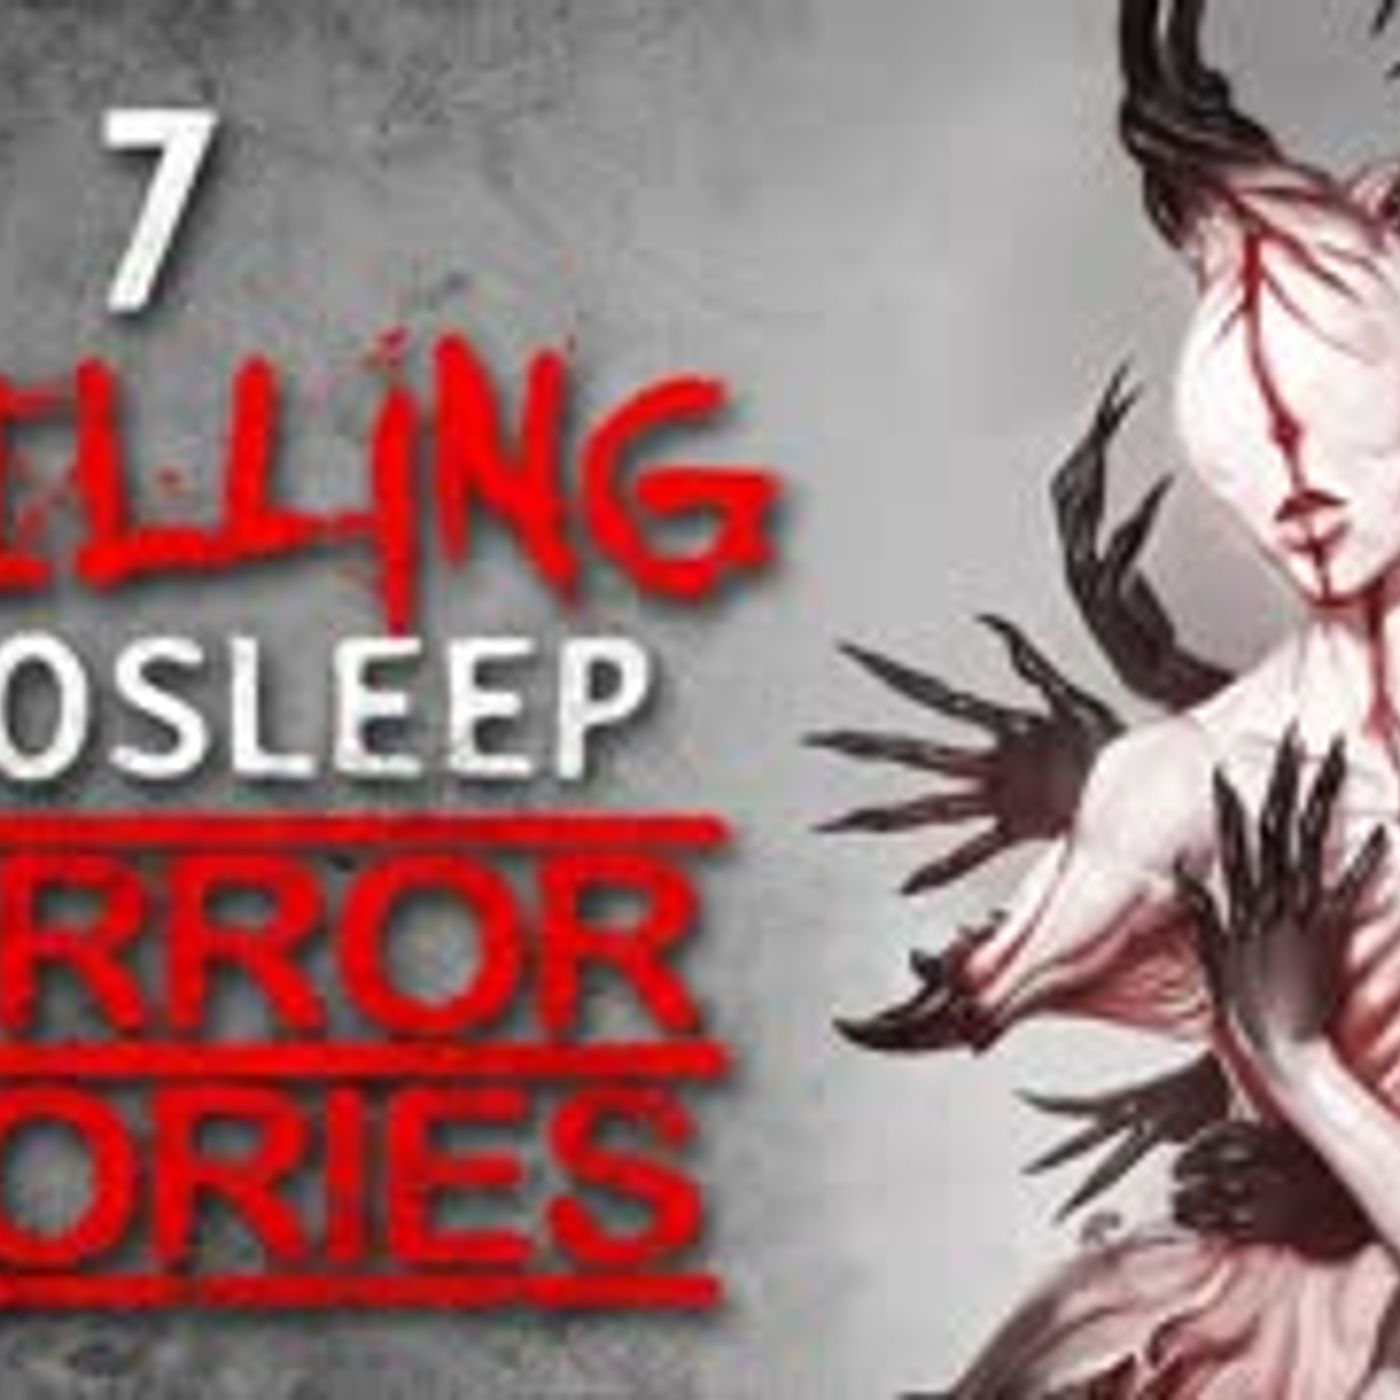 7 CHILLING r nosleep Horror Stories To Wash over Your Dreams Tonight